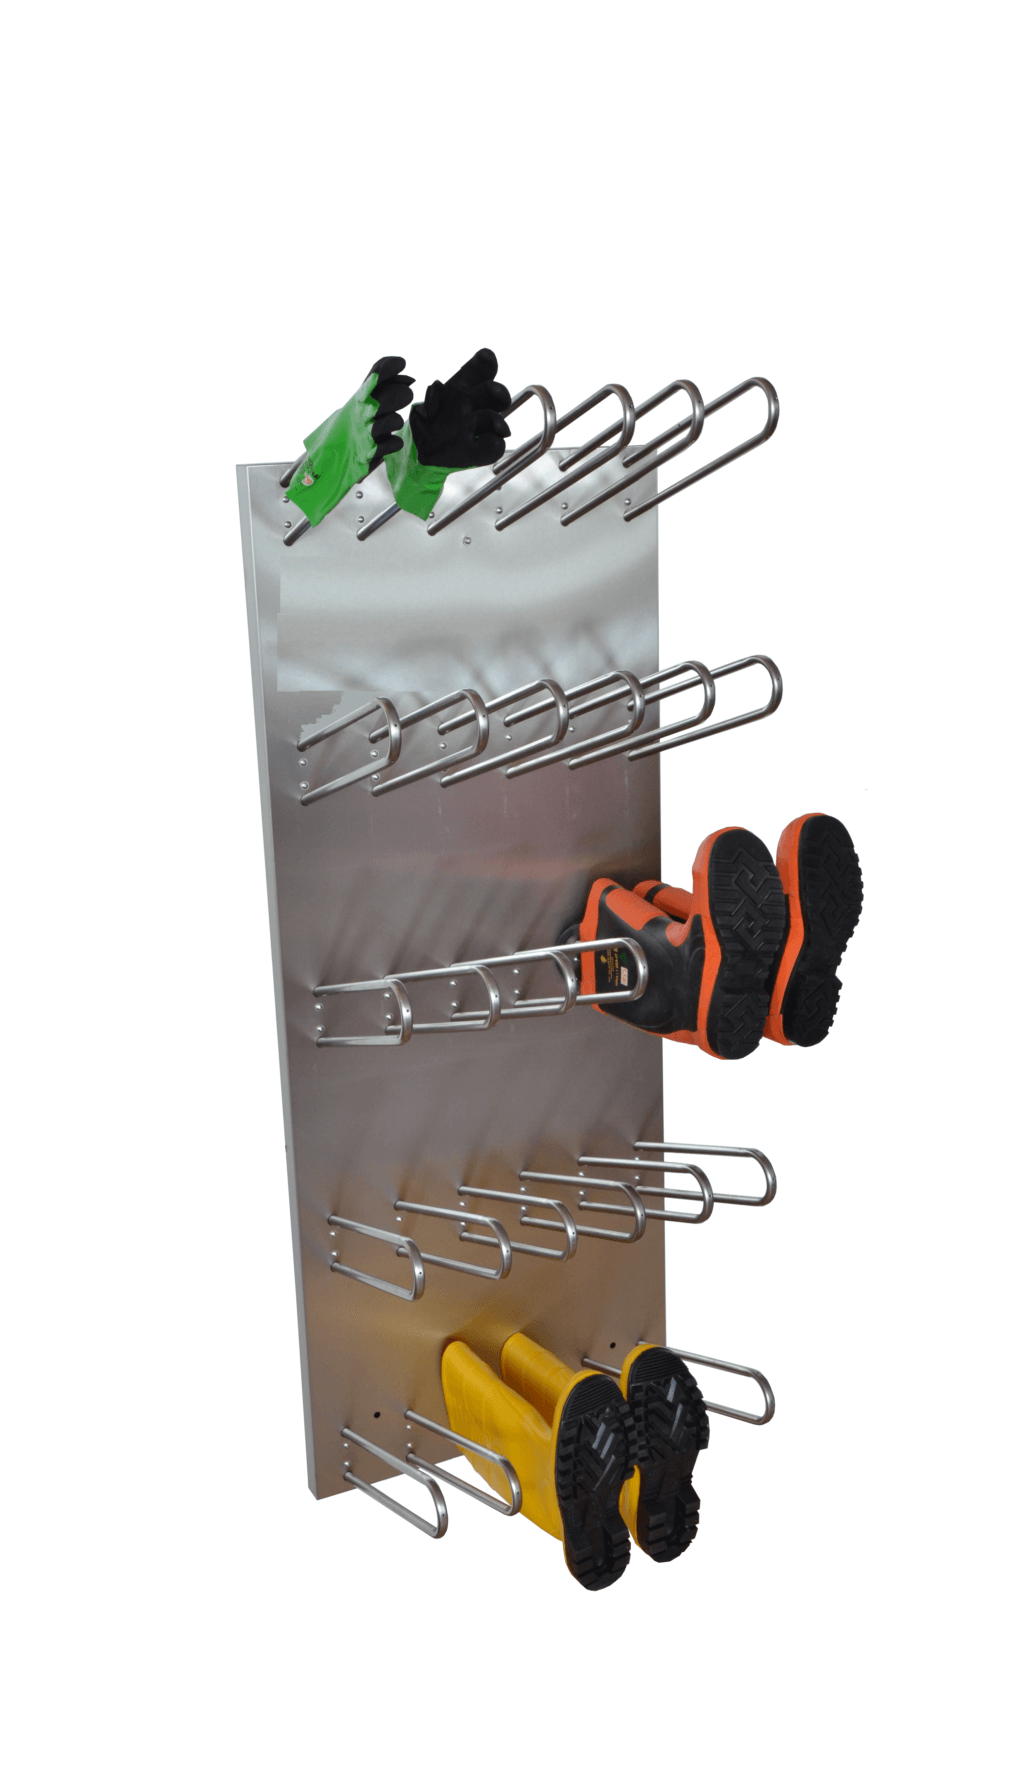 Electrical professional drying system for boots, shoes and gloves